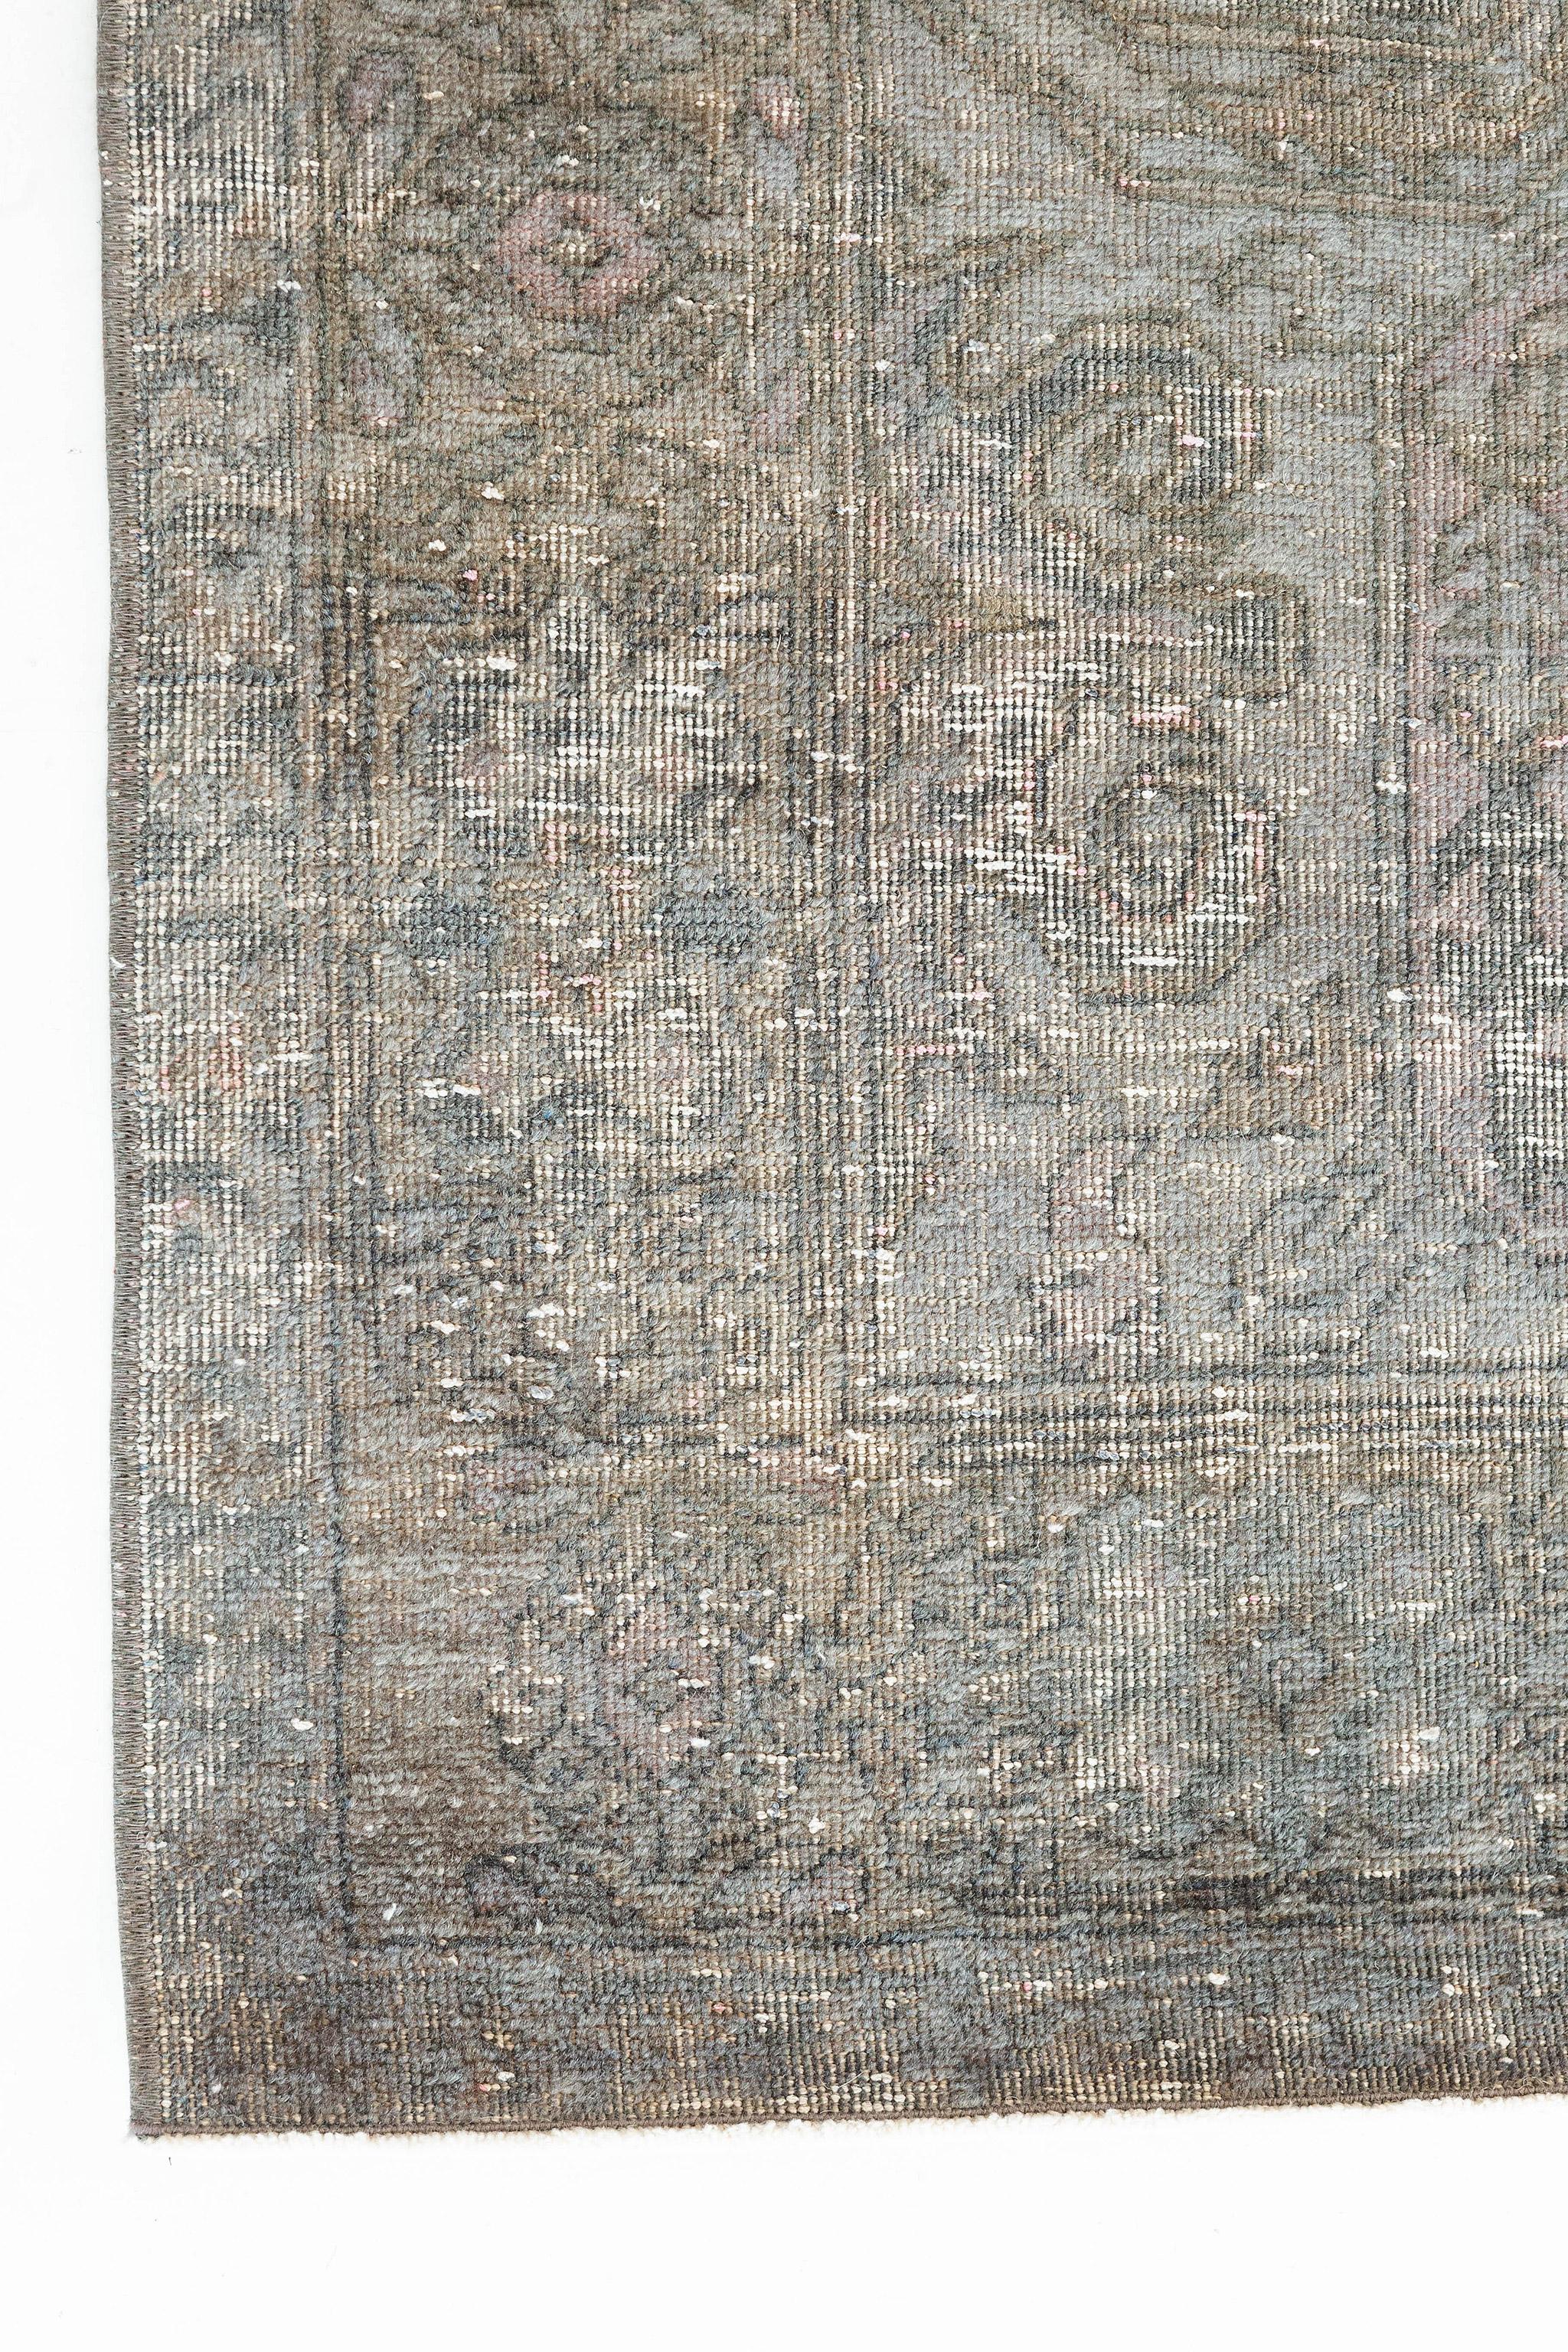 A remarkable overdyed vintage Turkish Anatolian rug that will unexpectedly bring a positive energy to a room’s interior design. Intricately made from overdyed hand spun wool which brought out a stunning deep stone and turquoise, this rug acts as a